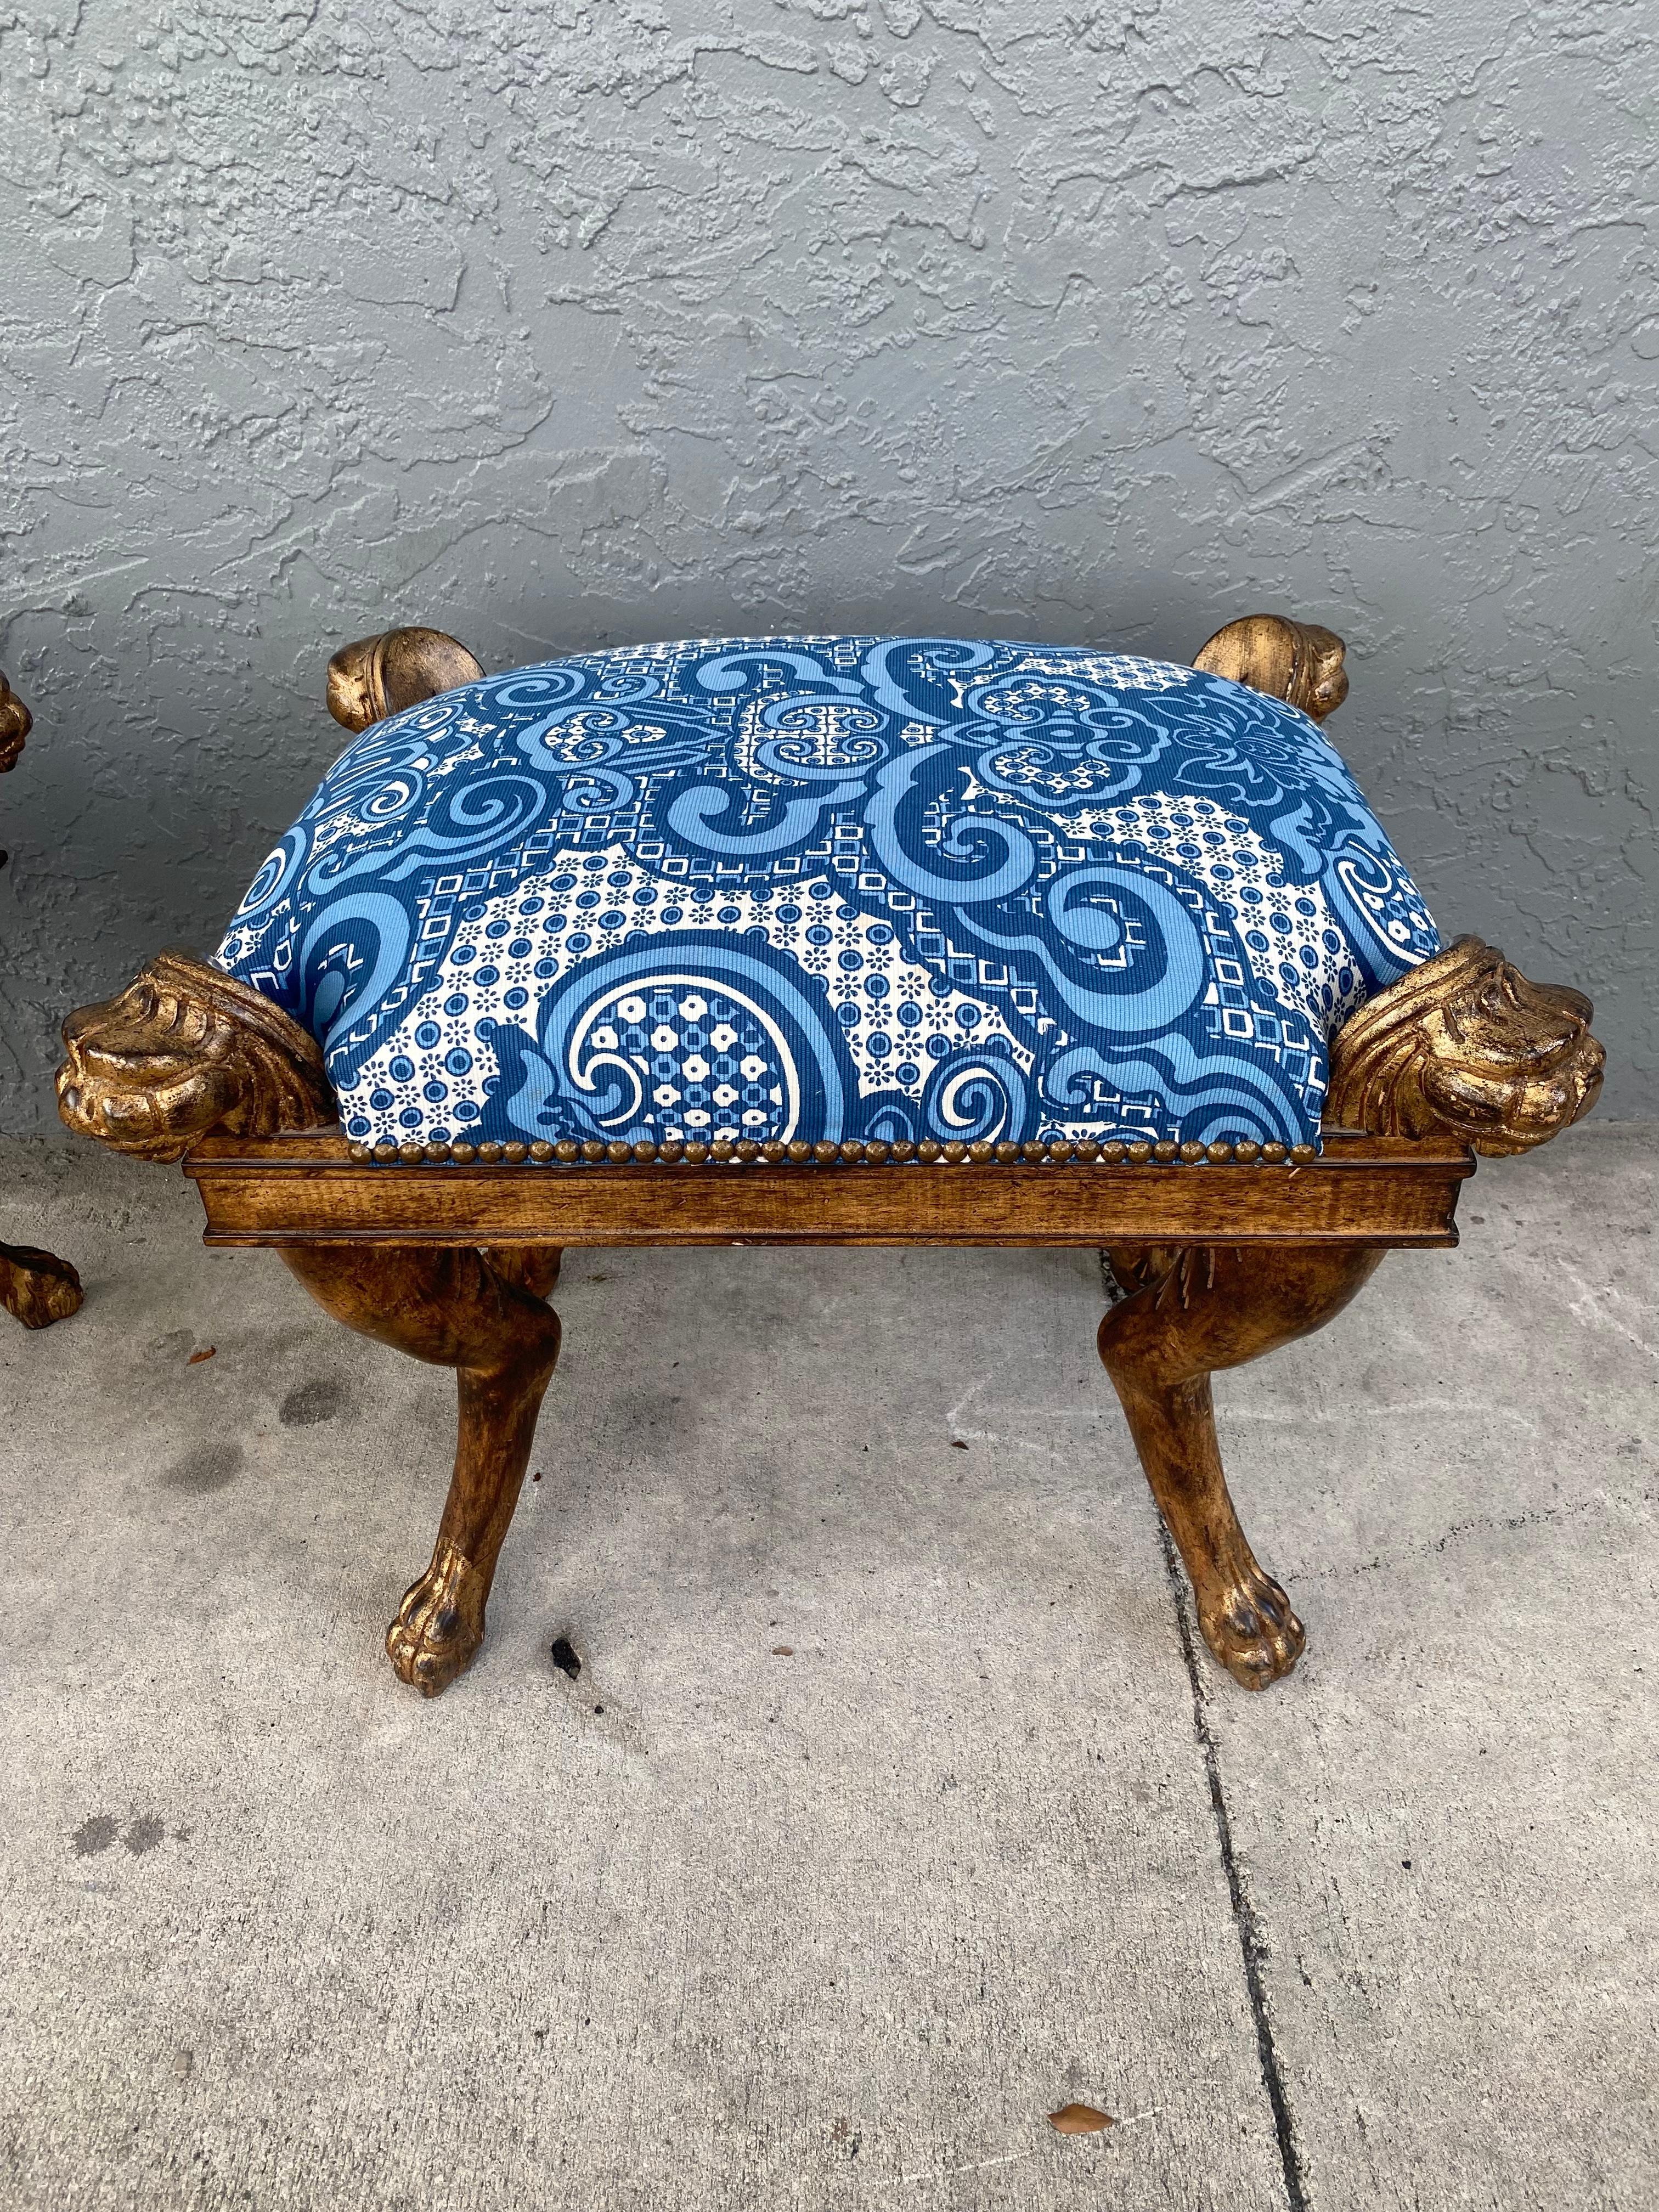 1960s Sculptural Carved Wood Lion Blue and White Bench Ottoman Stool For Sale 2